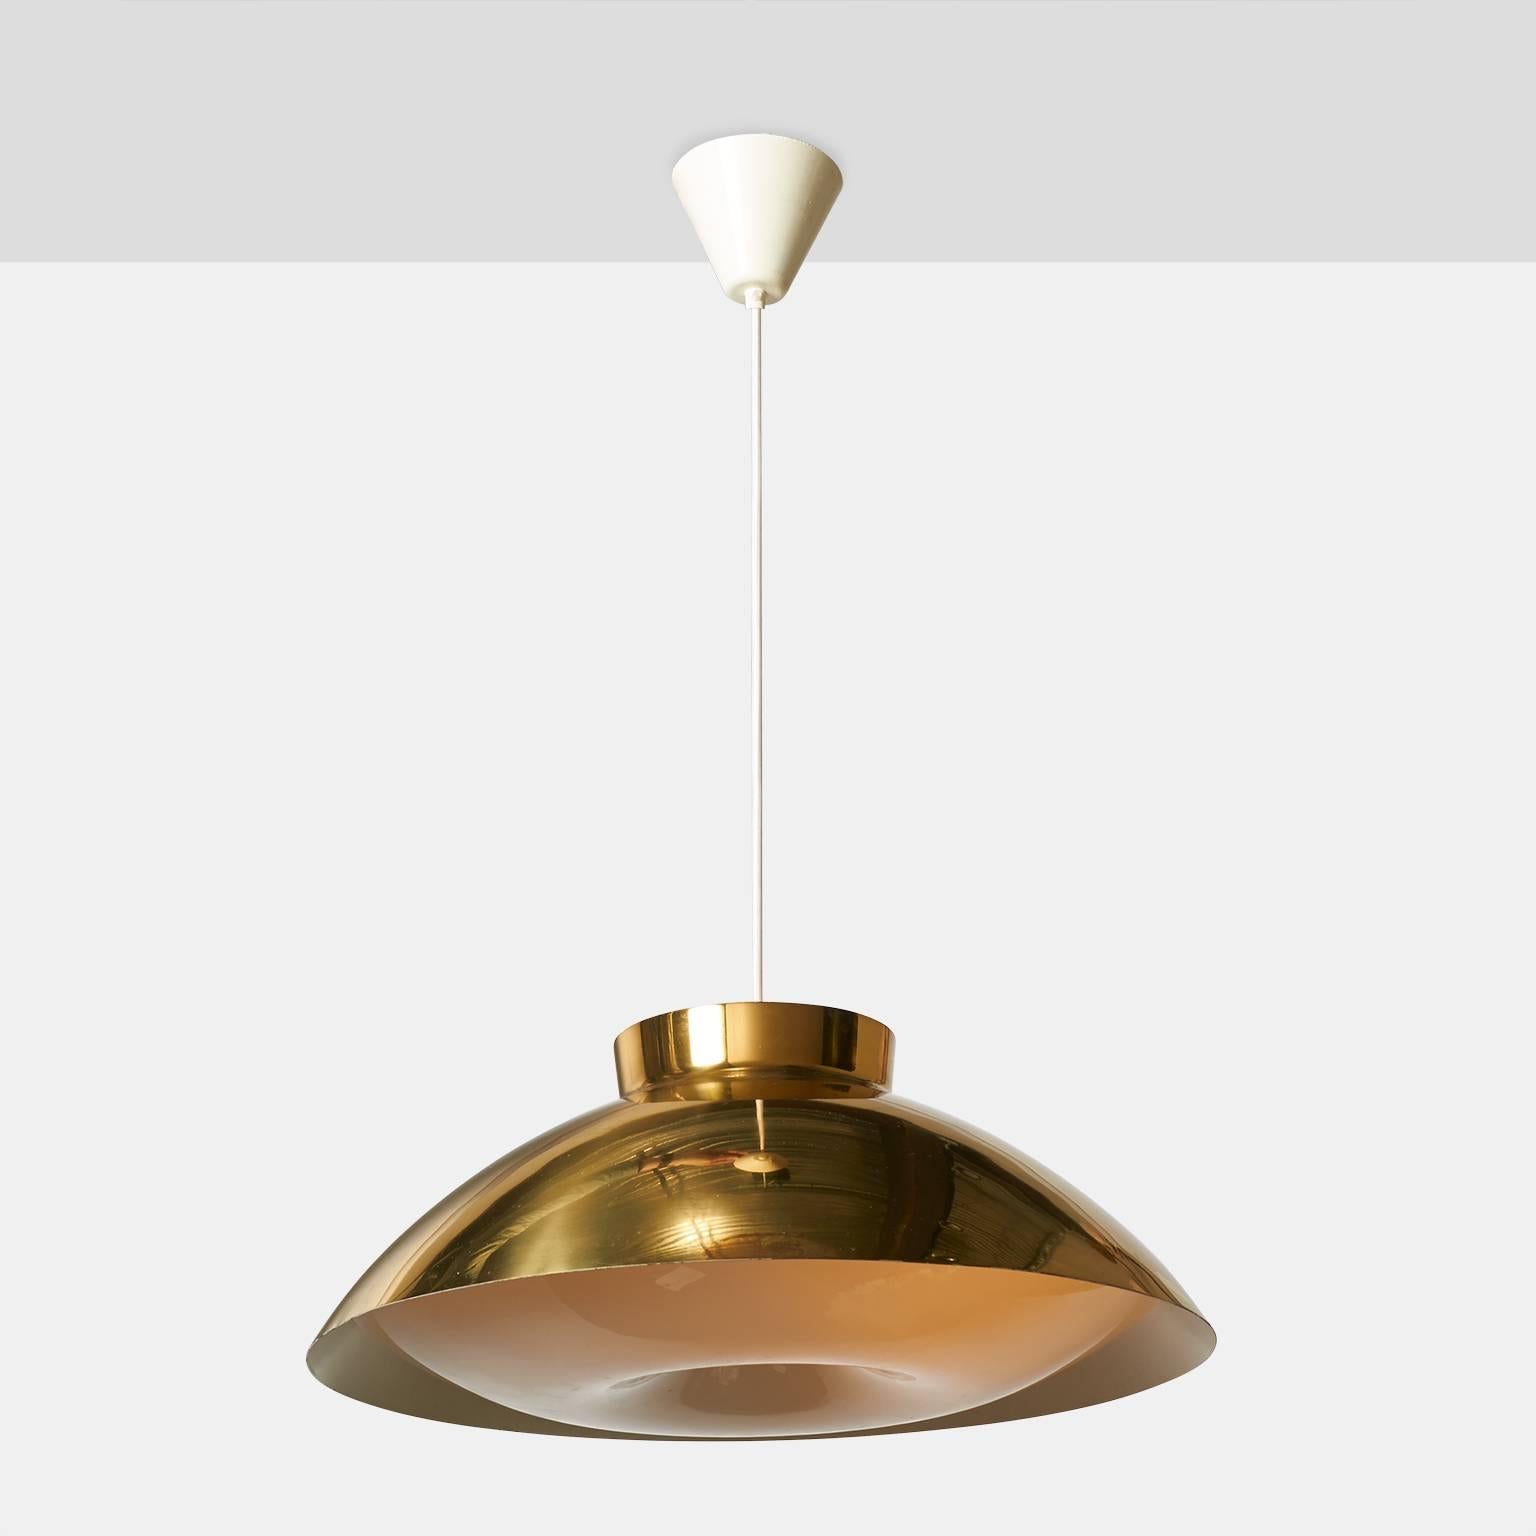 A large pendant with a brass shade that fits over a shaped plexiglass diffuser attached with a brass rosette in the center. There are three original porcelain Edison base sockets concealed inside. Made for Orno, Finland, circa 1950.